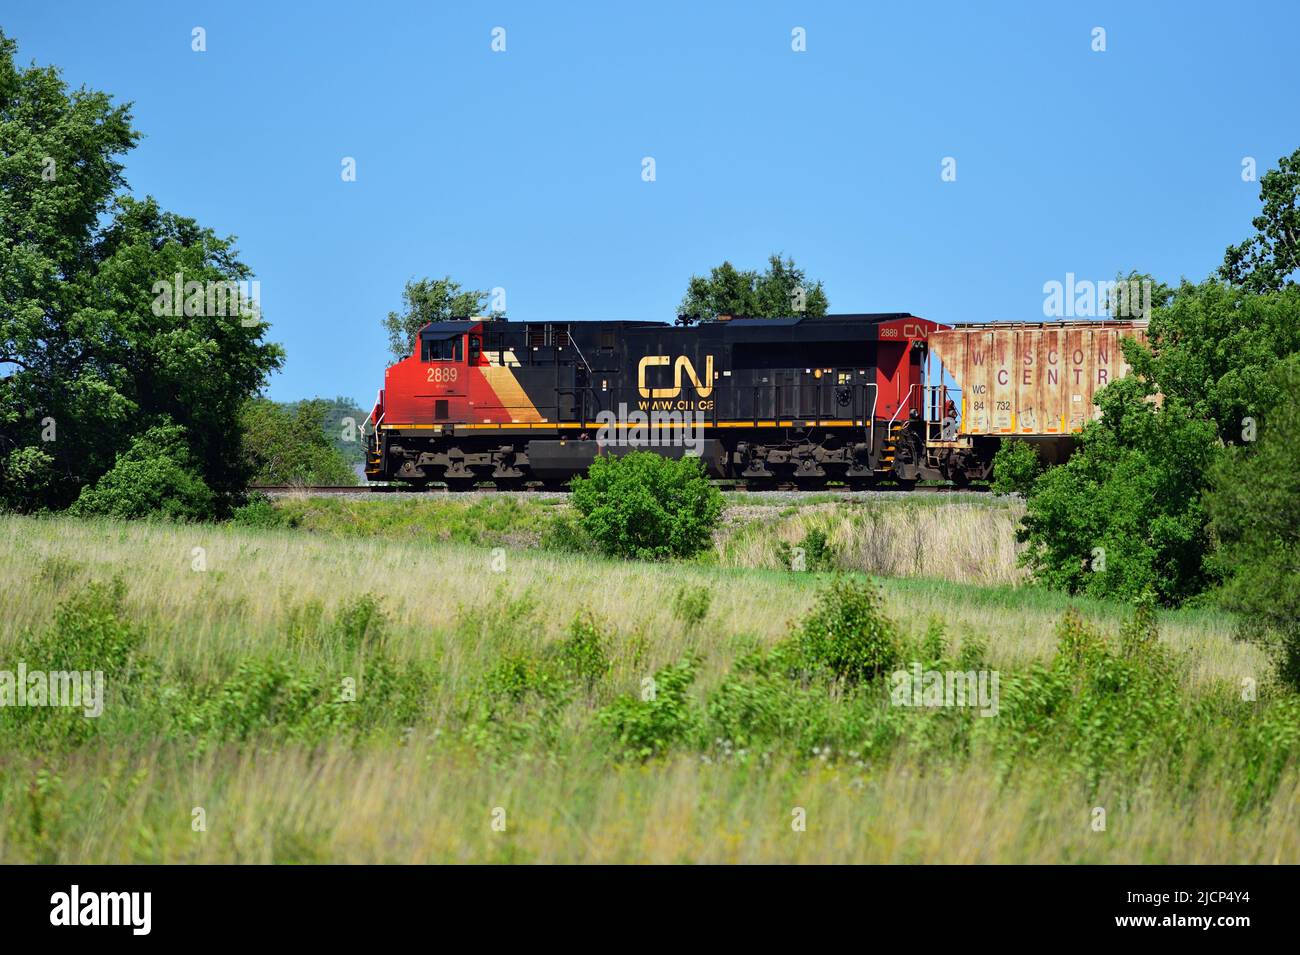 Wayne, Illinois, USA. A Canadian National Railway locomotive leads a freight train through a rural section of northeastern Illinois. Stock Photo